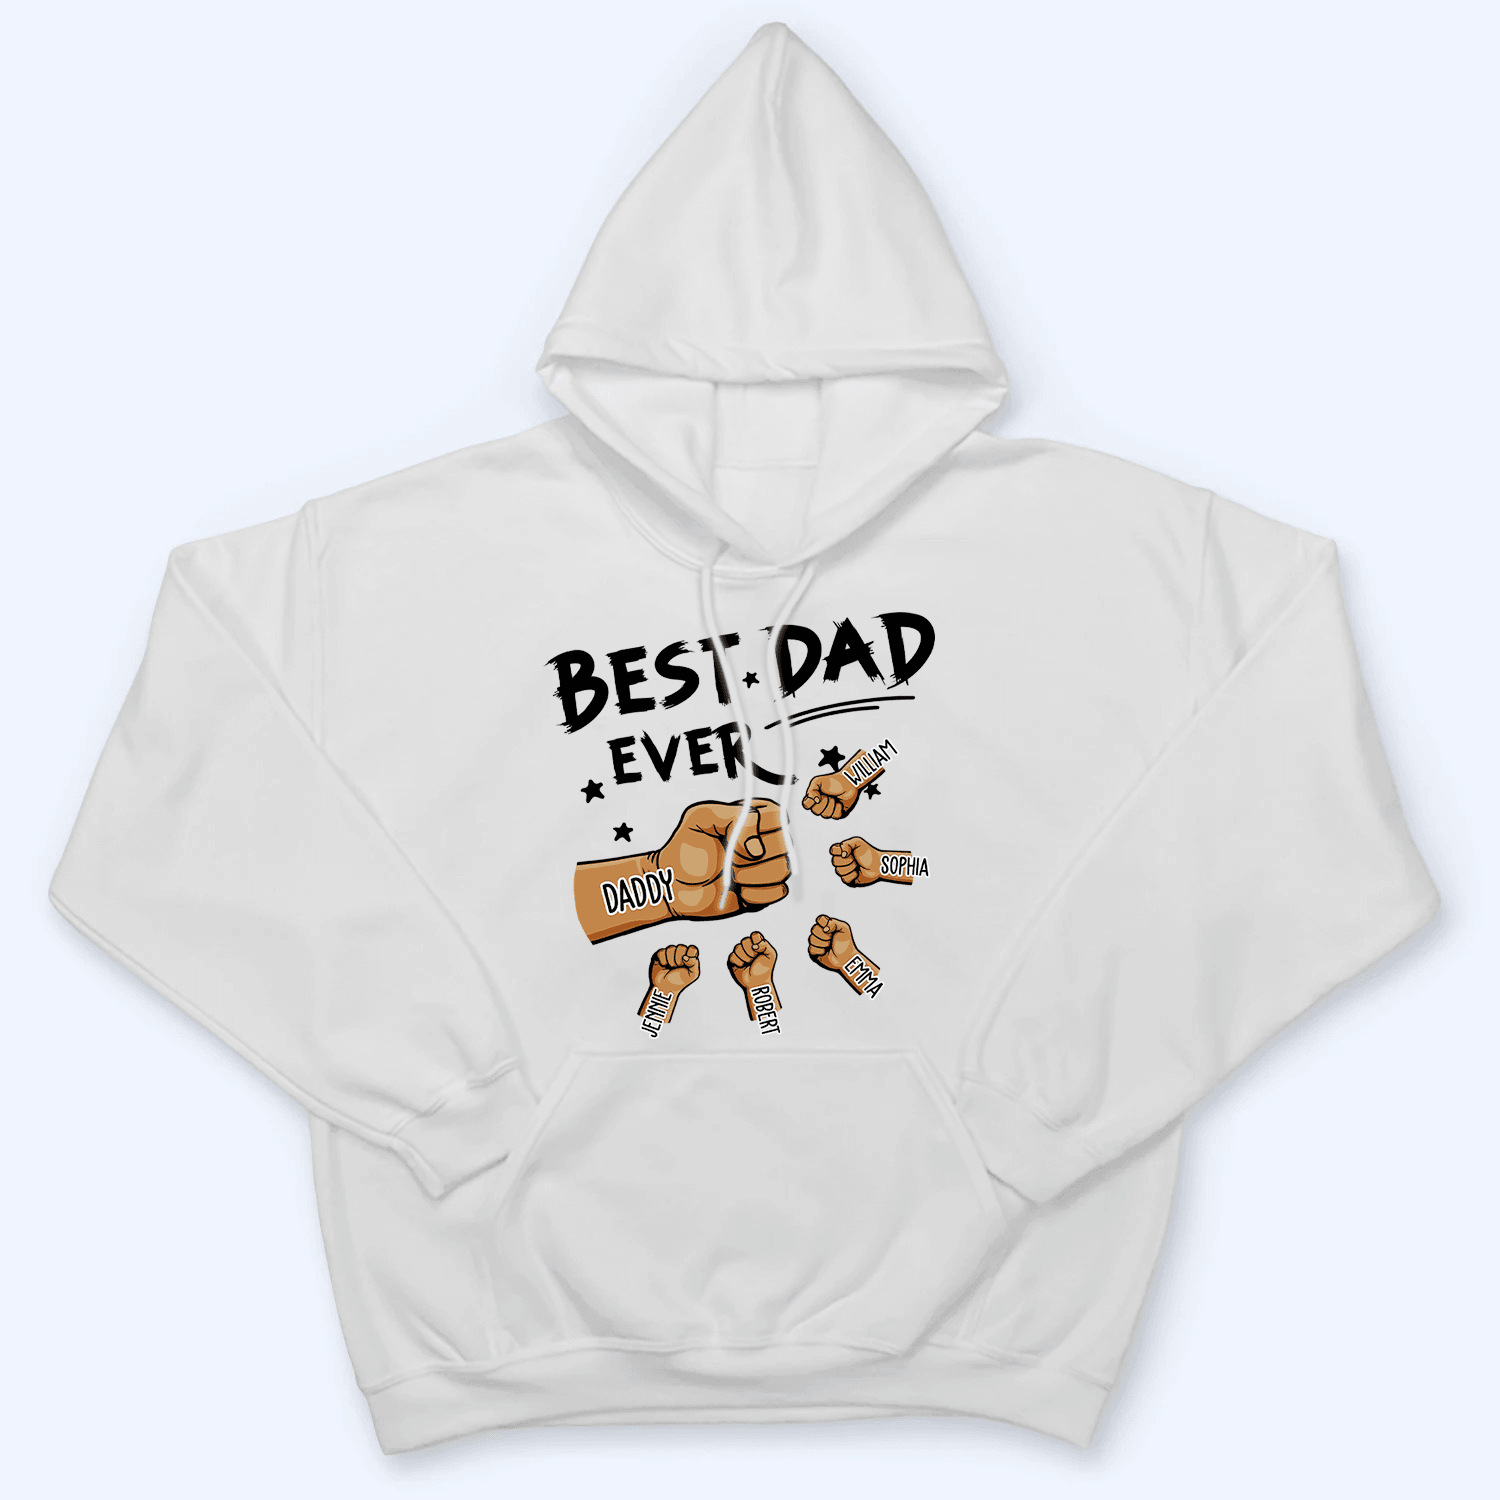 The Best Dad Ever - Personalized Custom T Shirt - Father's Day Gift for Dad, Papa, Grandpa, Daddy, Dada